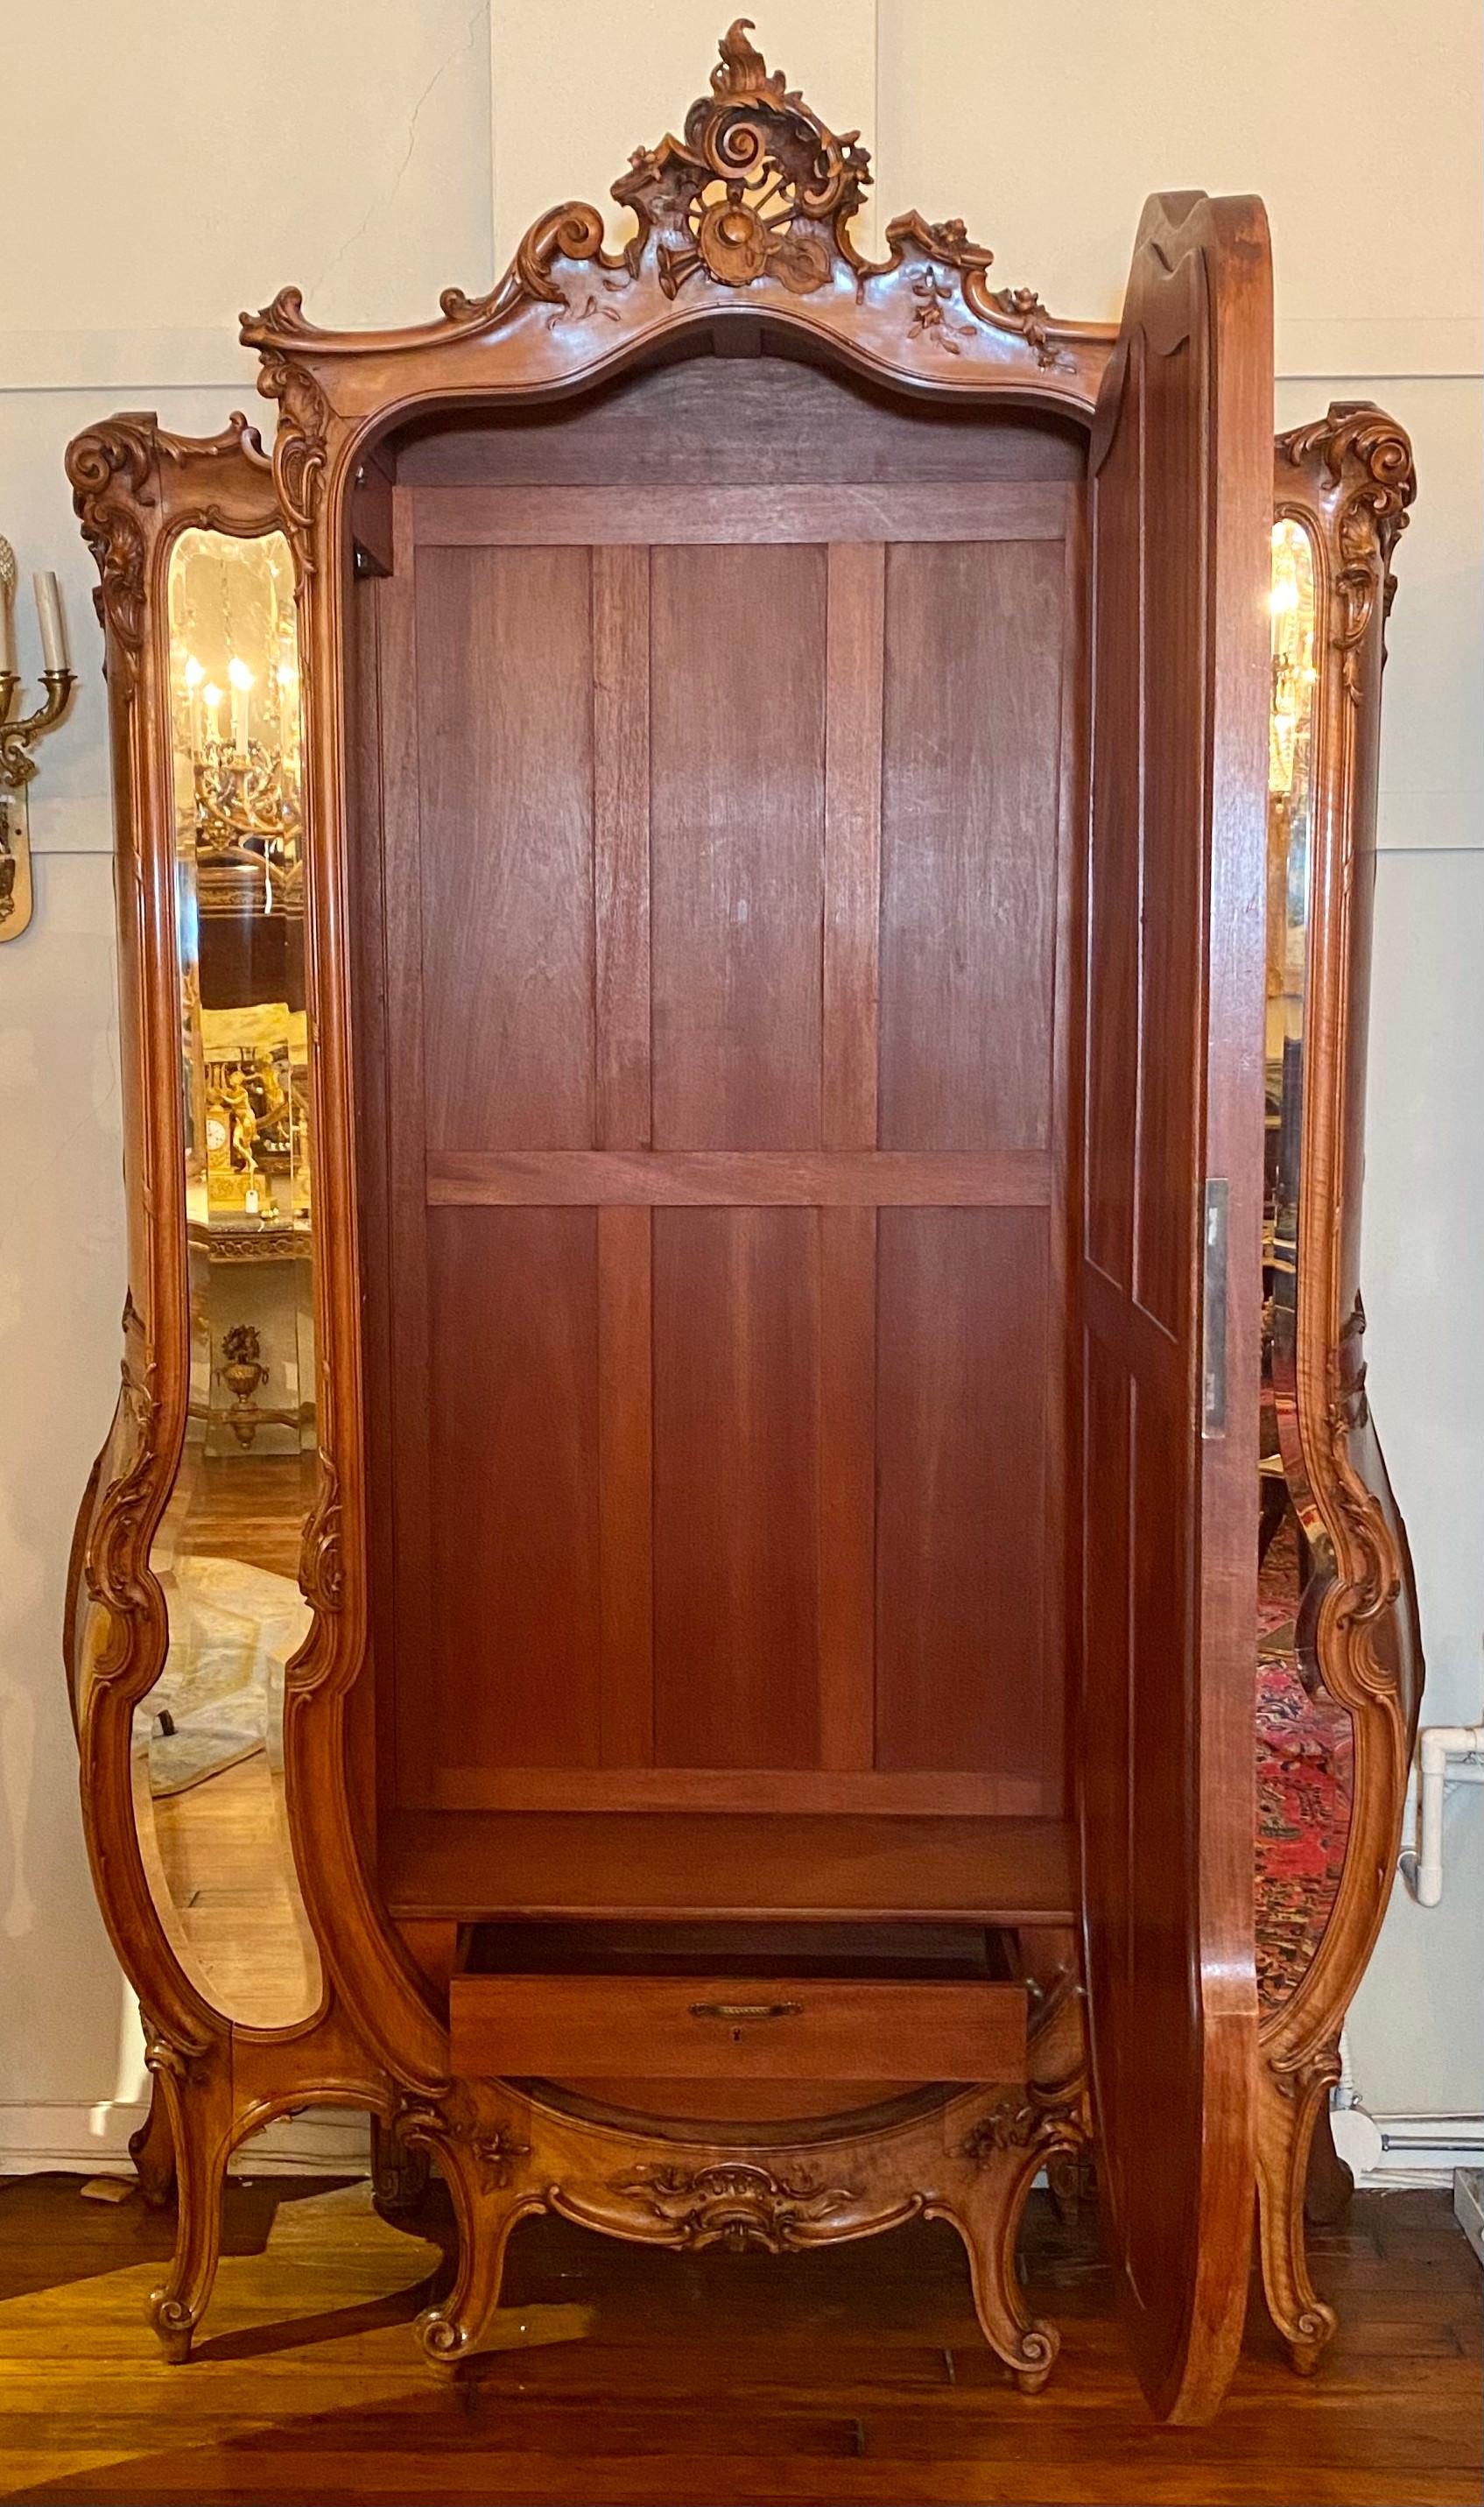 Grand antique French walnut serpentine armoire with carved detail and beveled mirrors, circa 1880.